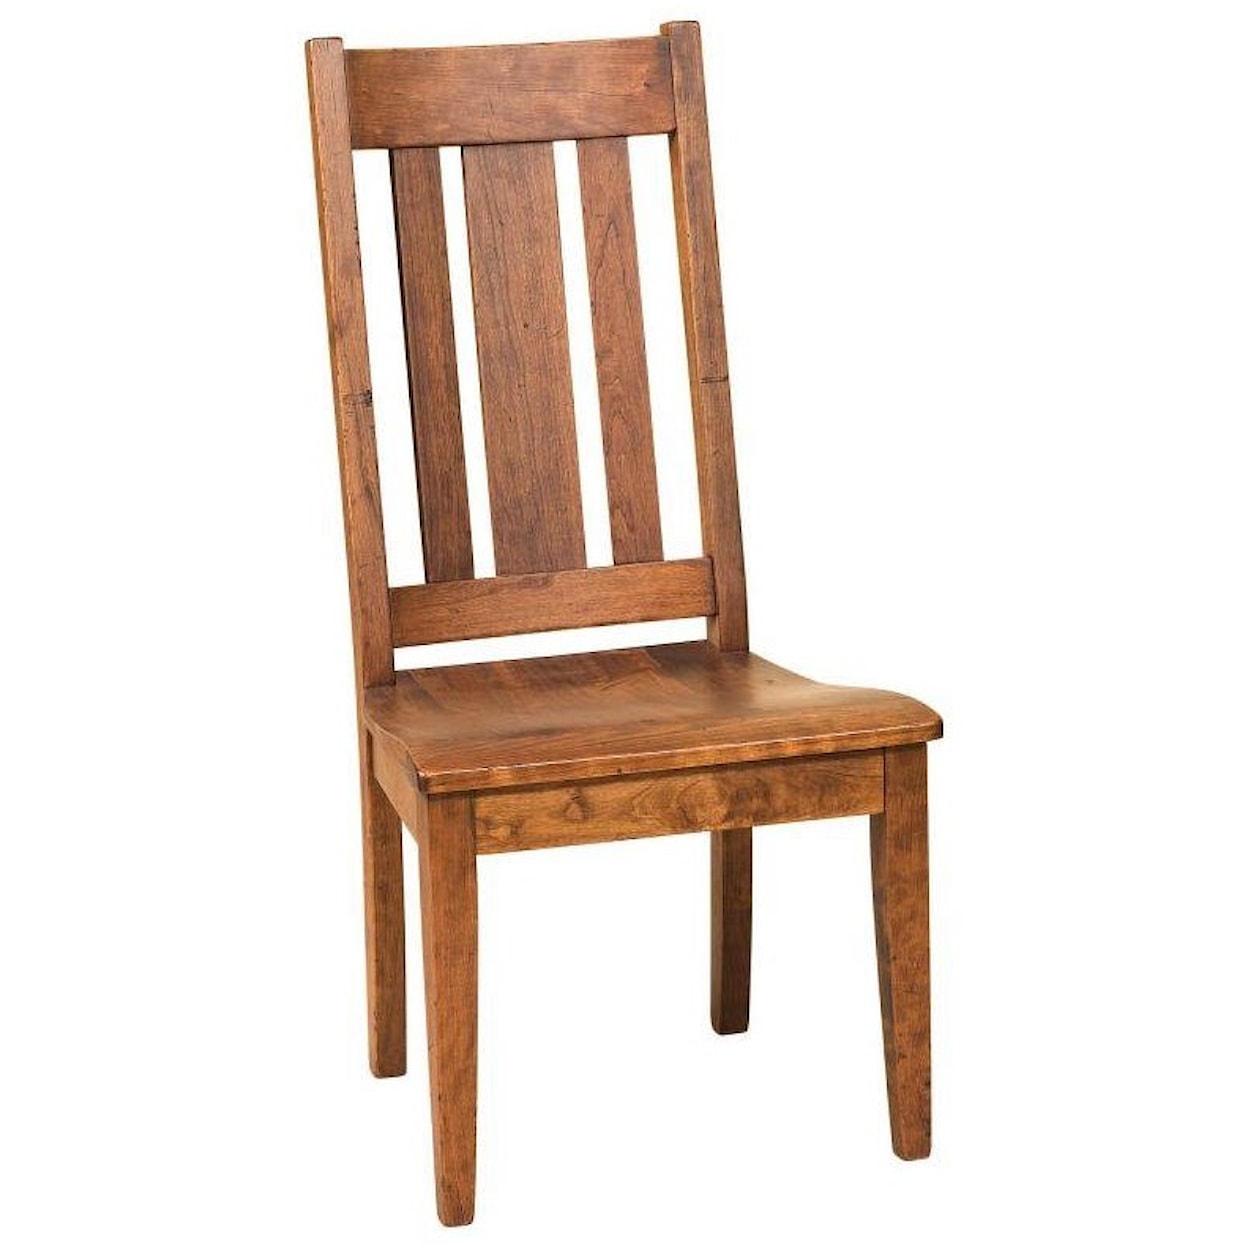 F&N Woodworking Jacoby Side Chair